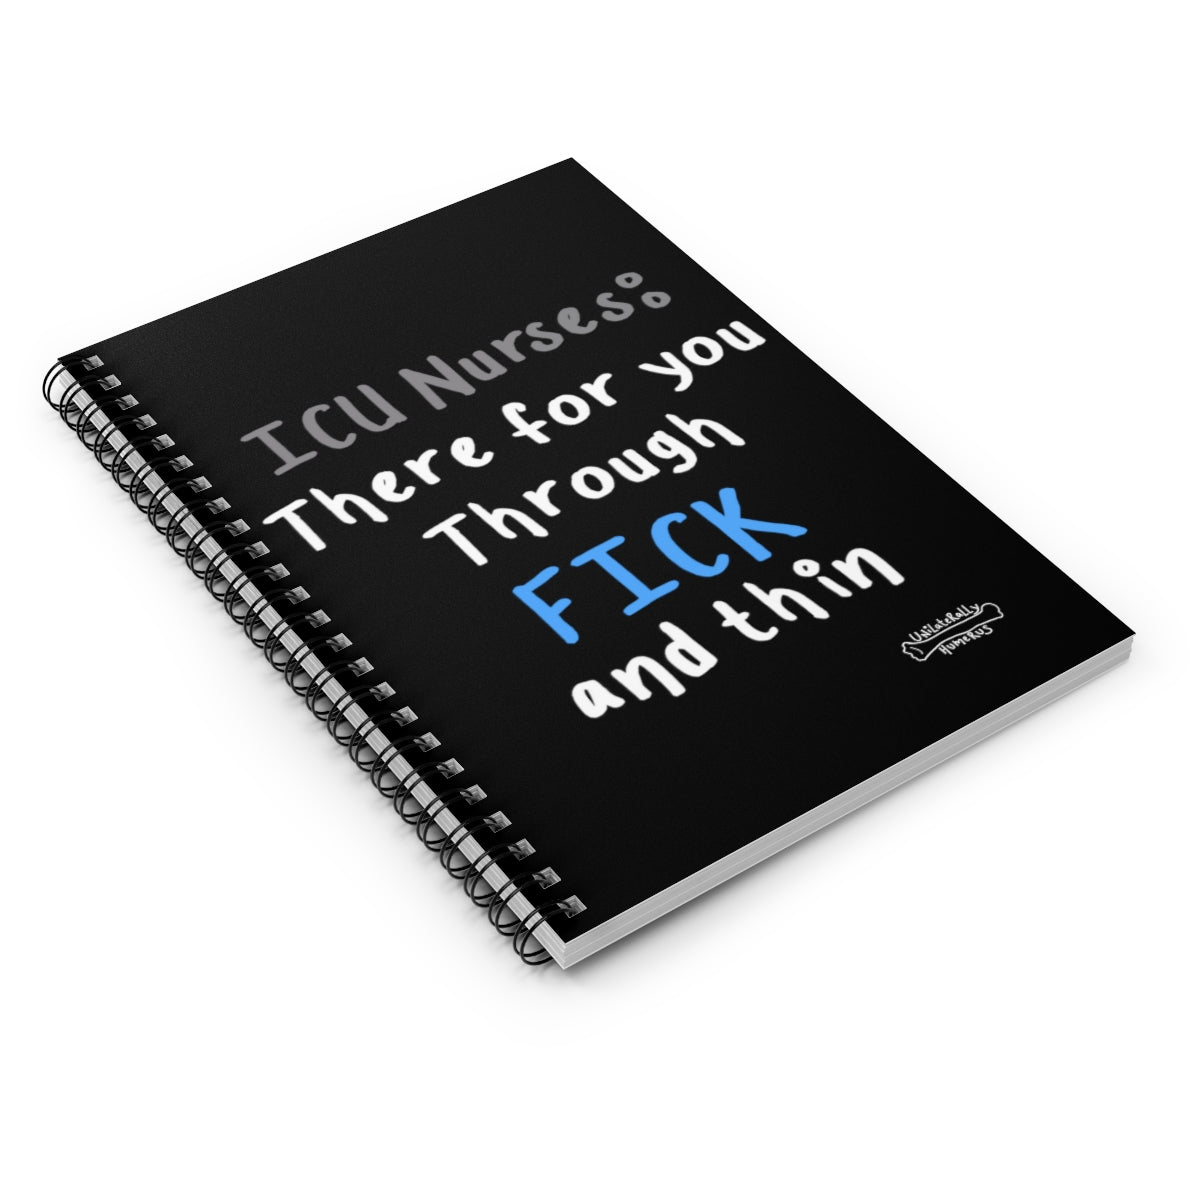 Fick and Thin Spiral Notebook